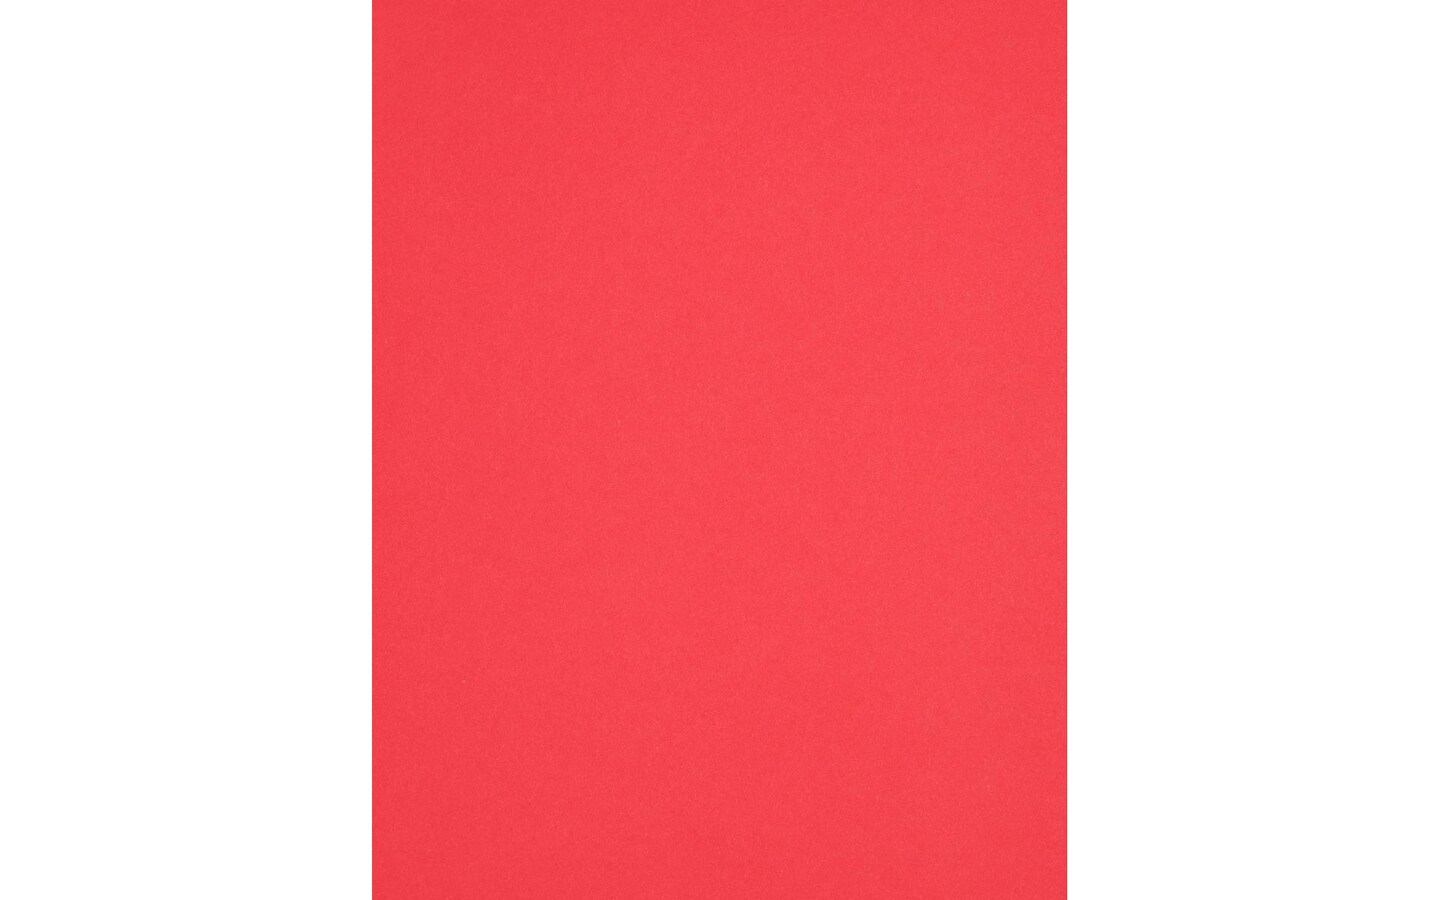 PA Paper Accents Smooth Cardstock 8.5&#x22; x 11&#x22; Red, 65lb colored cardstock paper for card making, scrapbooking, printing, quilling and crafts, 1000 piece box